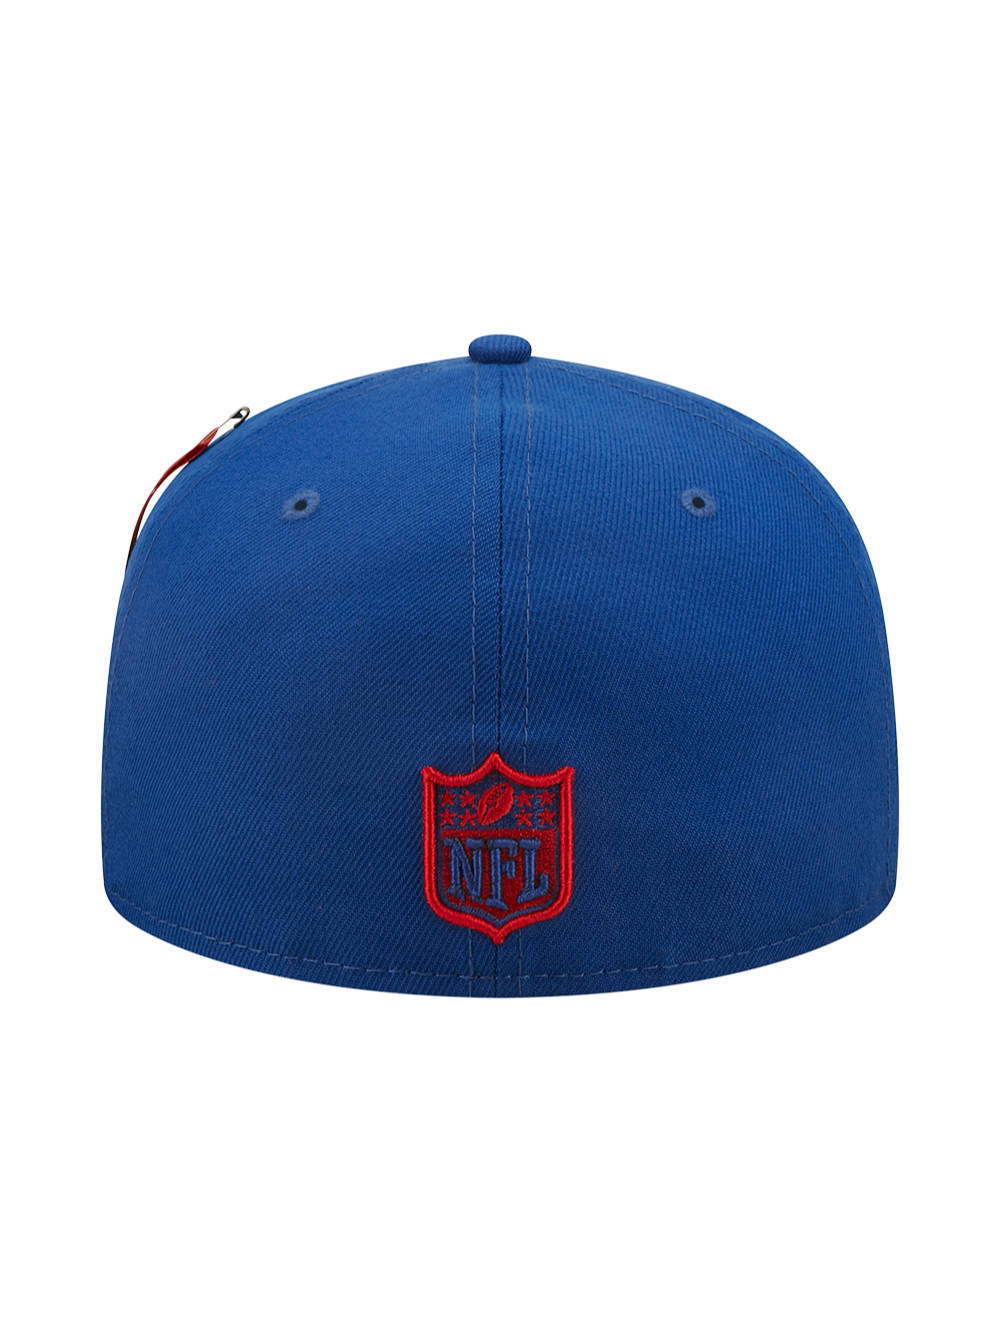 NEW YORK GIANTS X ALPHA X NEW ERA 59FIFTY FITTED CAP ACCESSORY Alpha Industries 